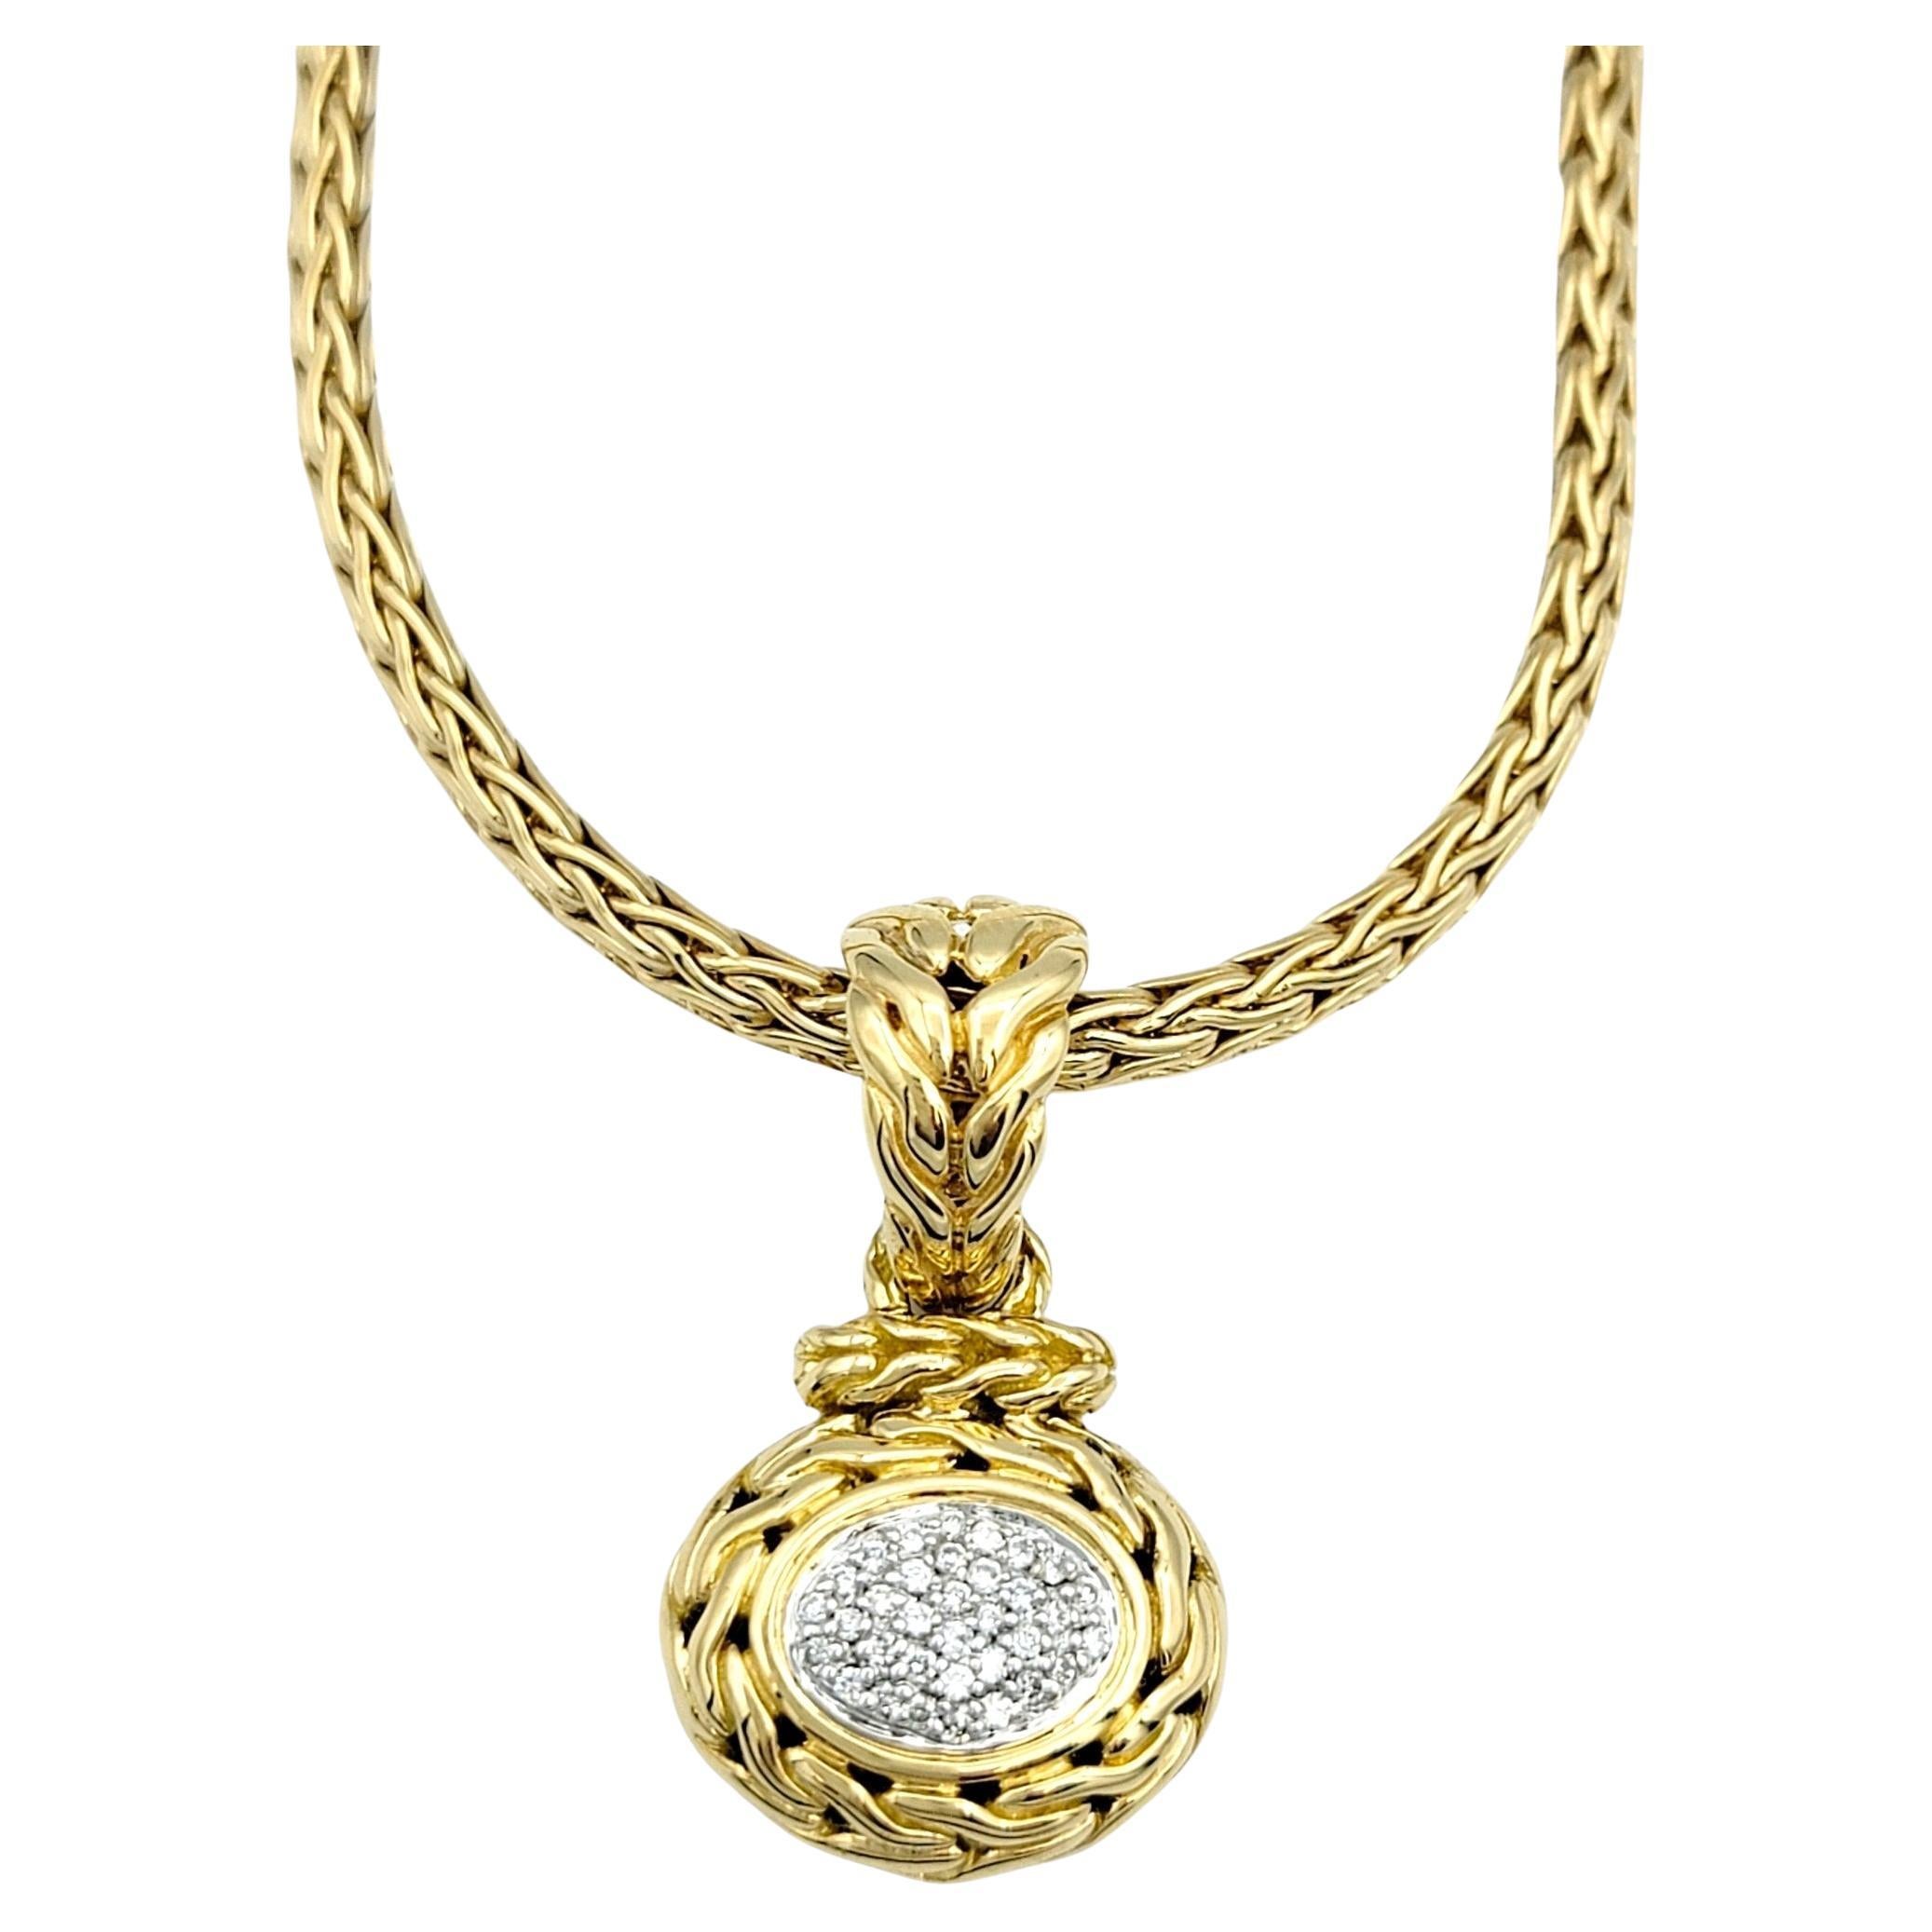 This beautiful John Hardy pavé diamond pendant necklace in 18 karat yellow gold is a striking piece that seamlessly blends luxury with artisanal craftsmanship. At the heart of the necklace lies an exquisite oval pendant adorned with pave diamonds,